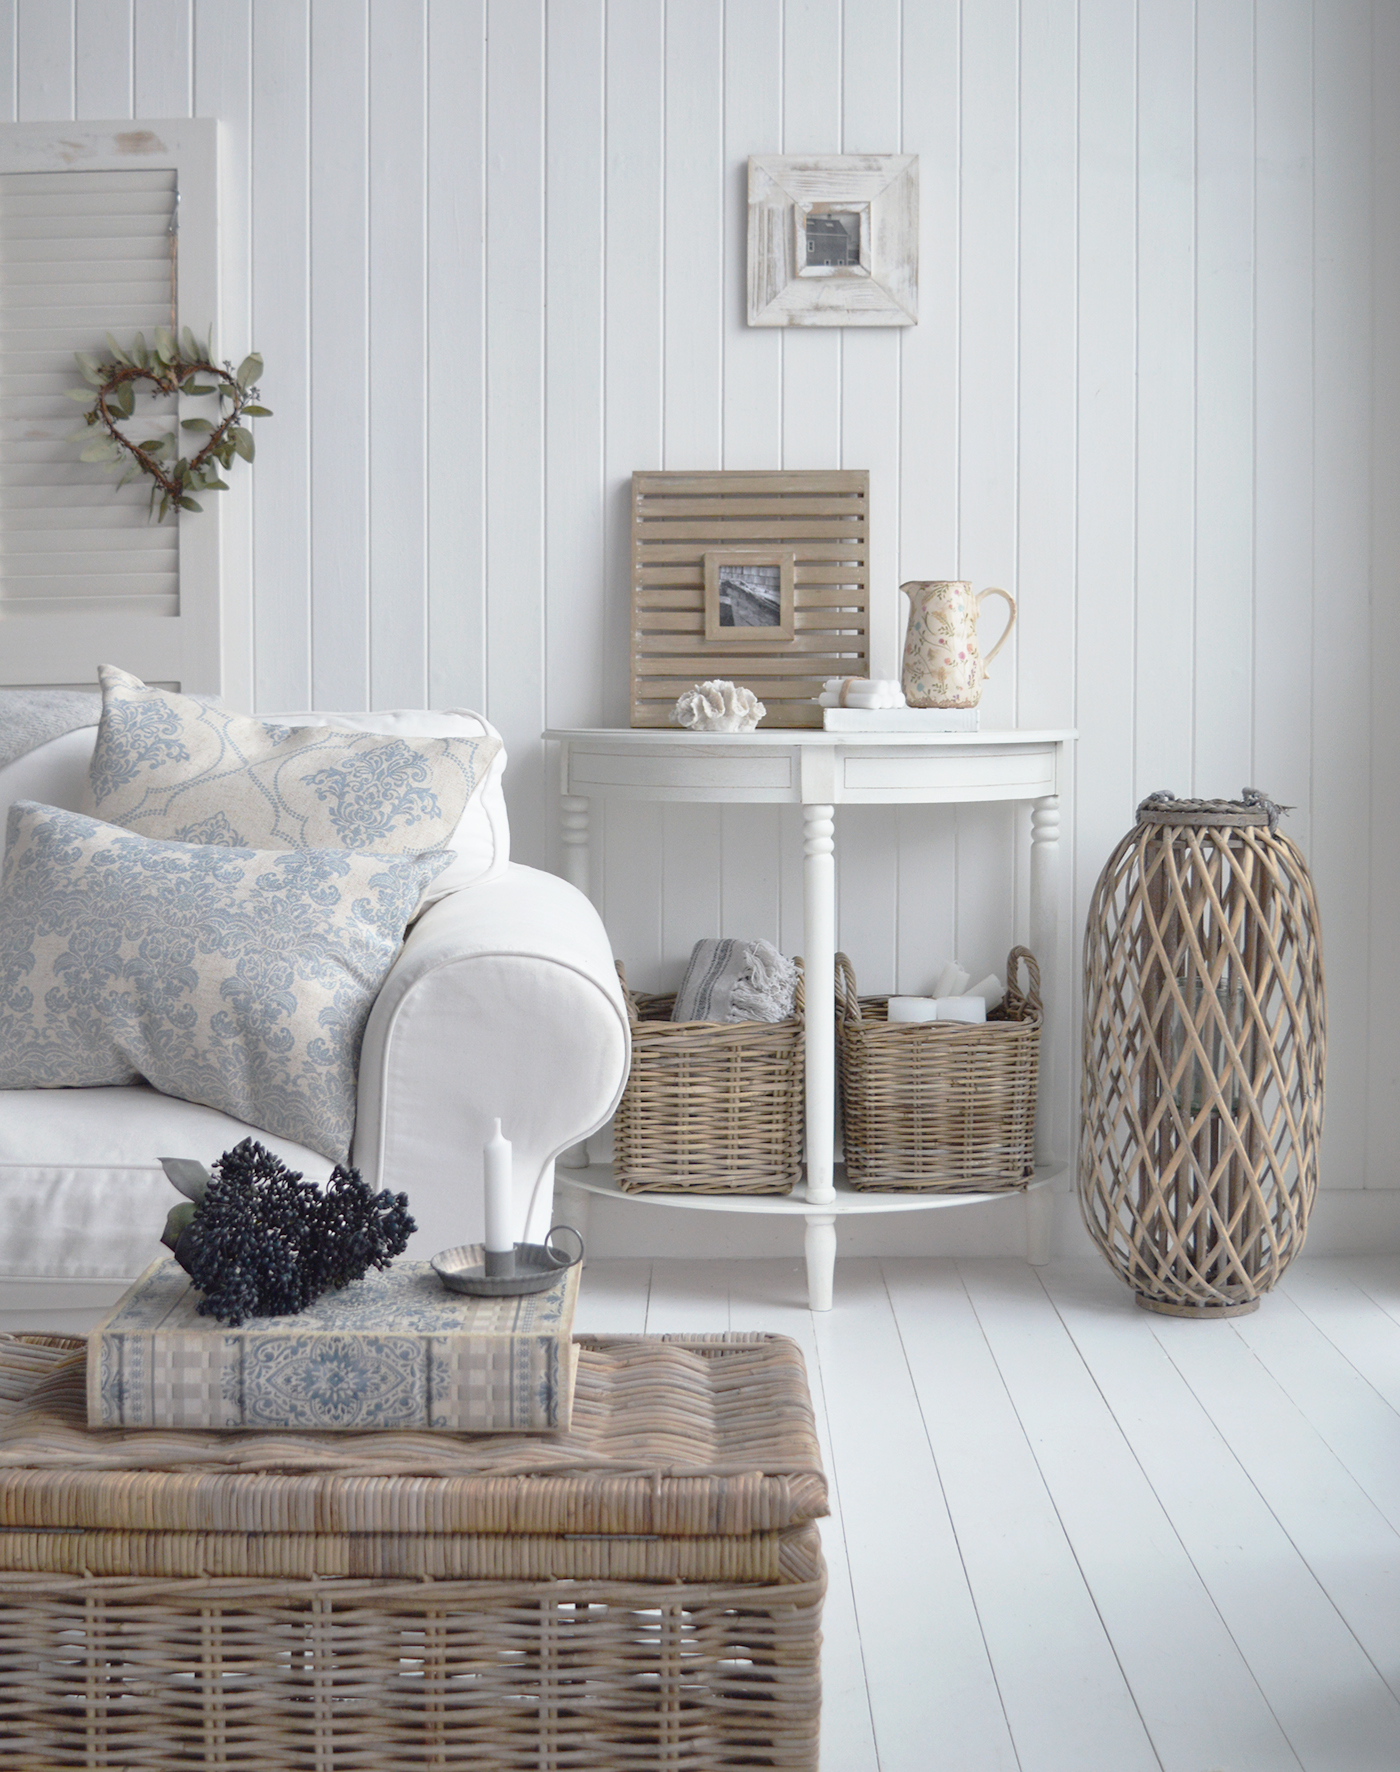 NEw England style living room, decor and furniture for coastal, country and modern farmhouse homes